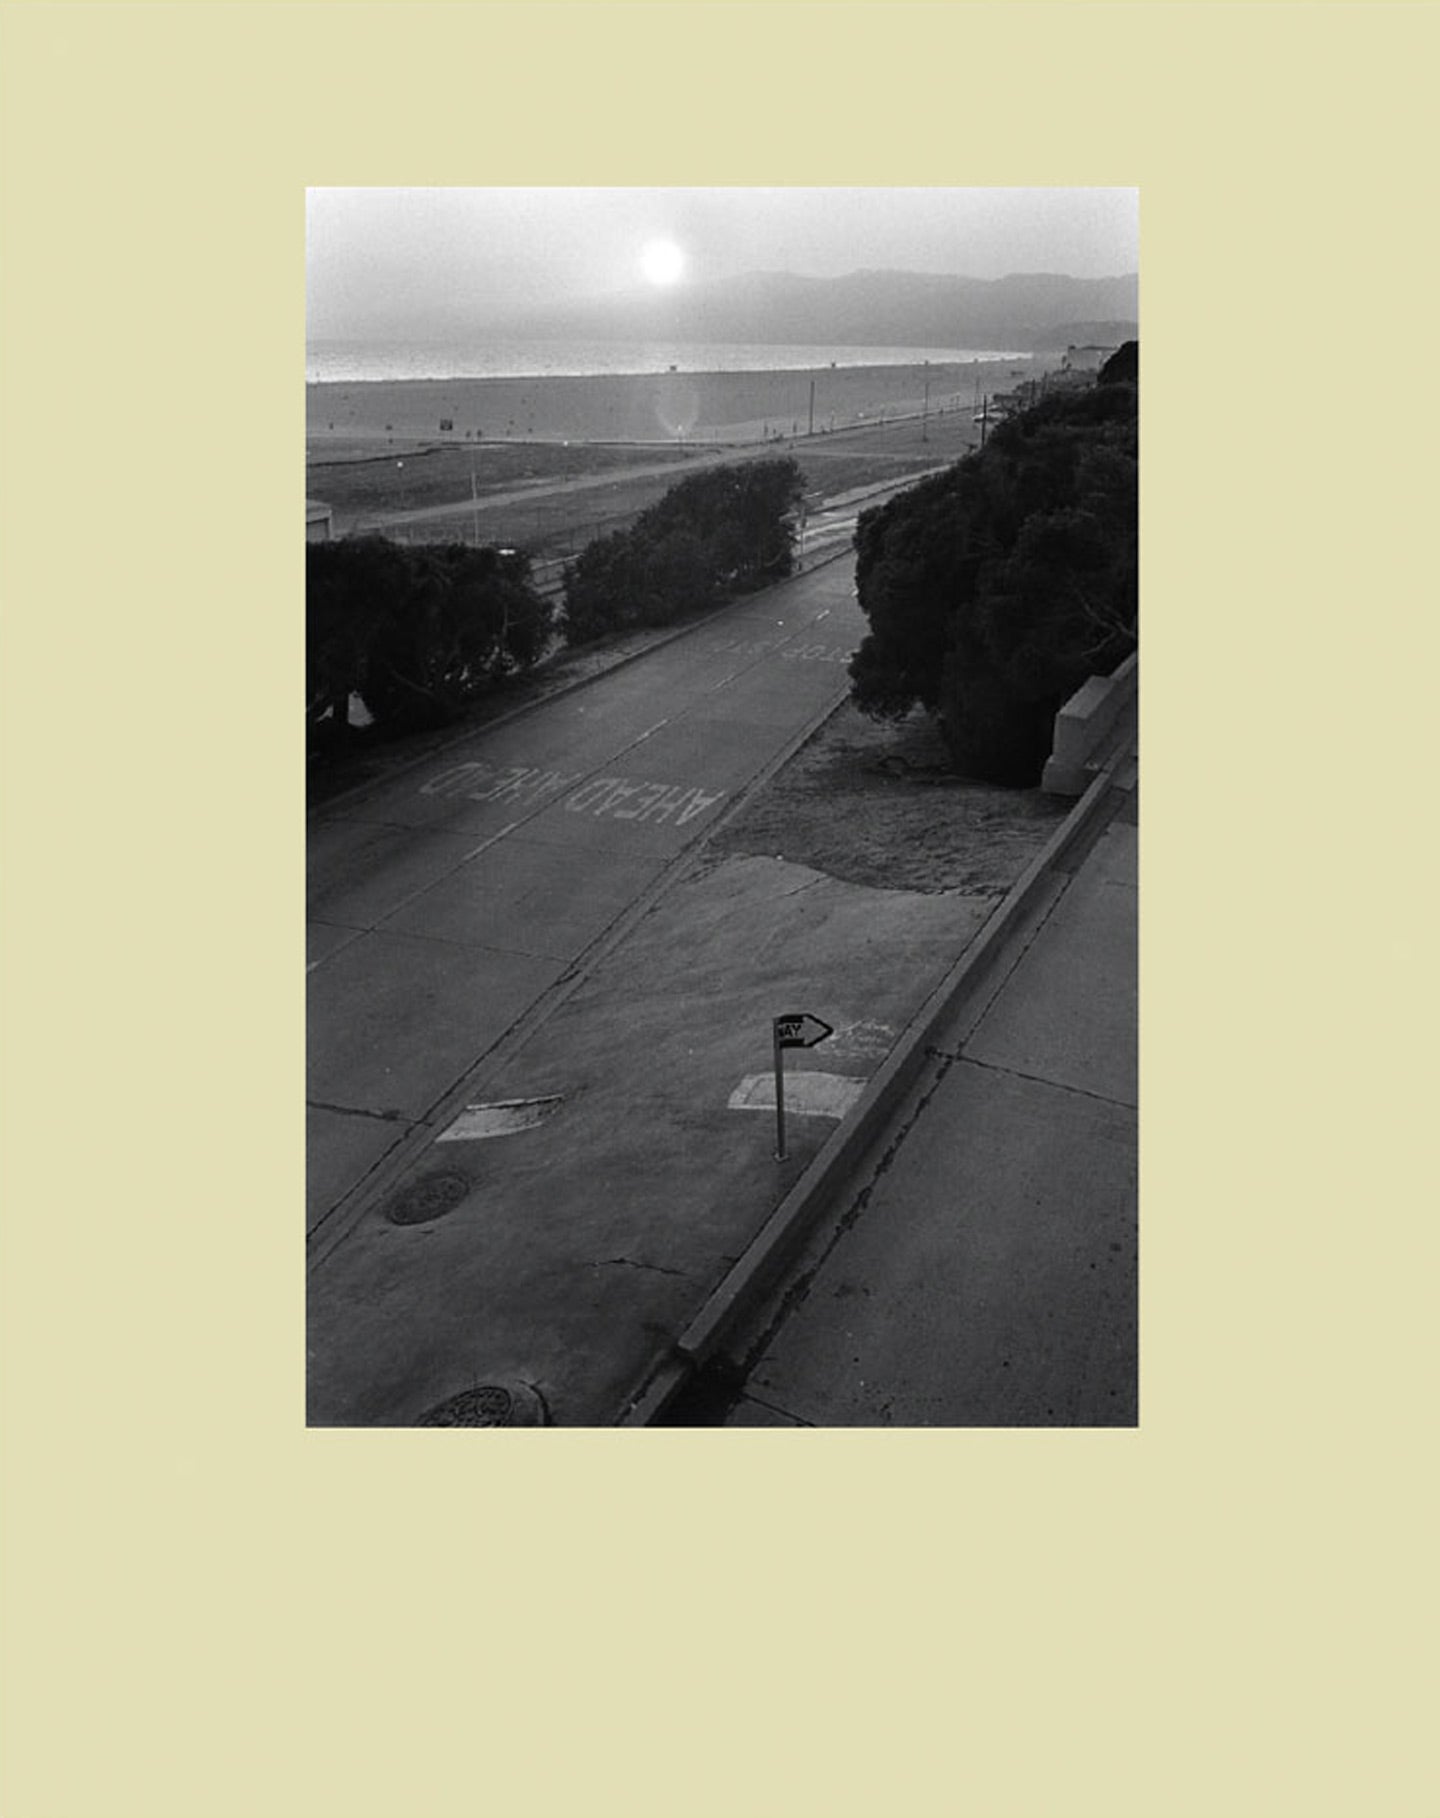 NZ Library #2: Mark Steinmetz: Angel City West: Volume One (1), Limited Edition (NZ Library - Set Two, Volume Six) [SIGNED]